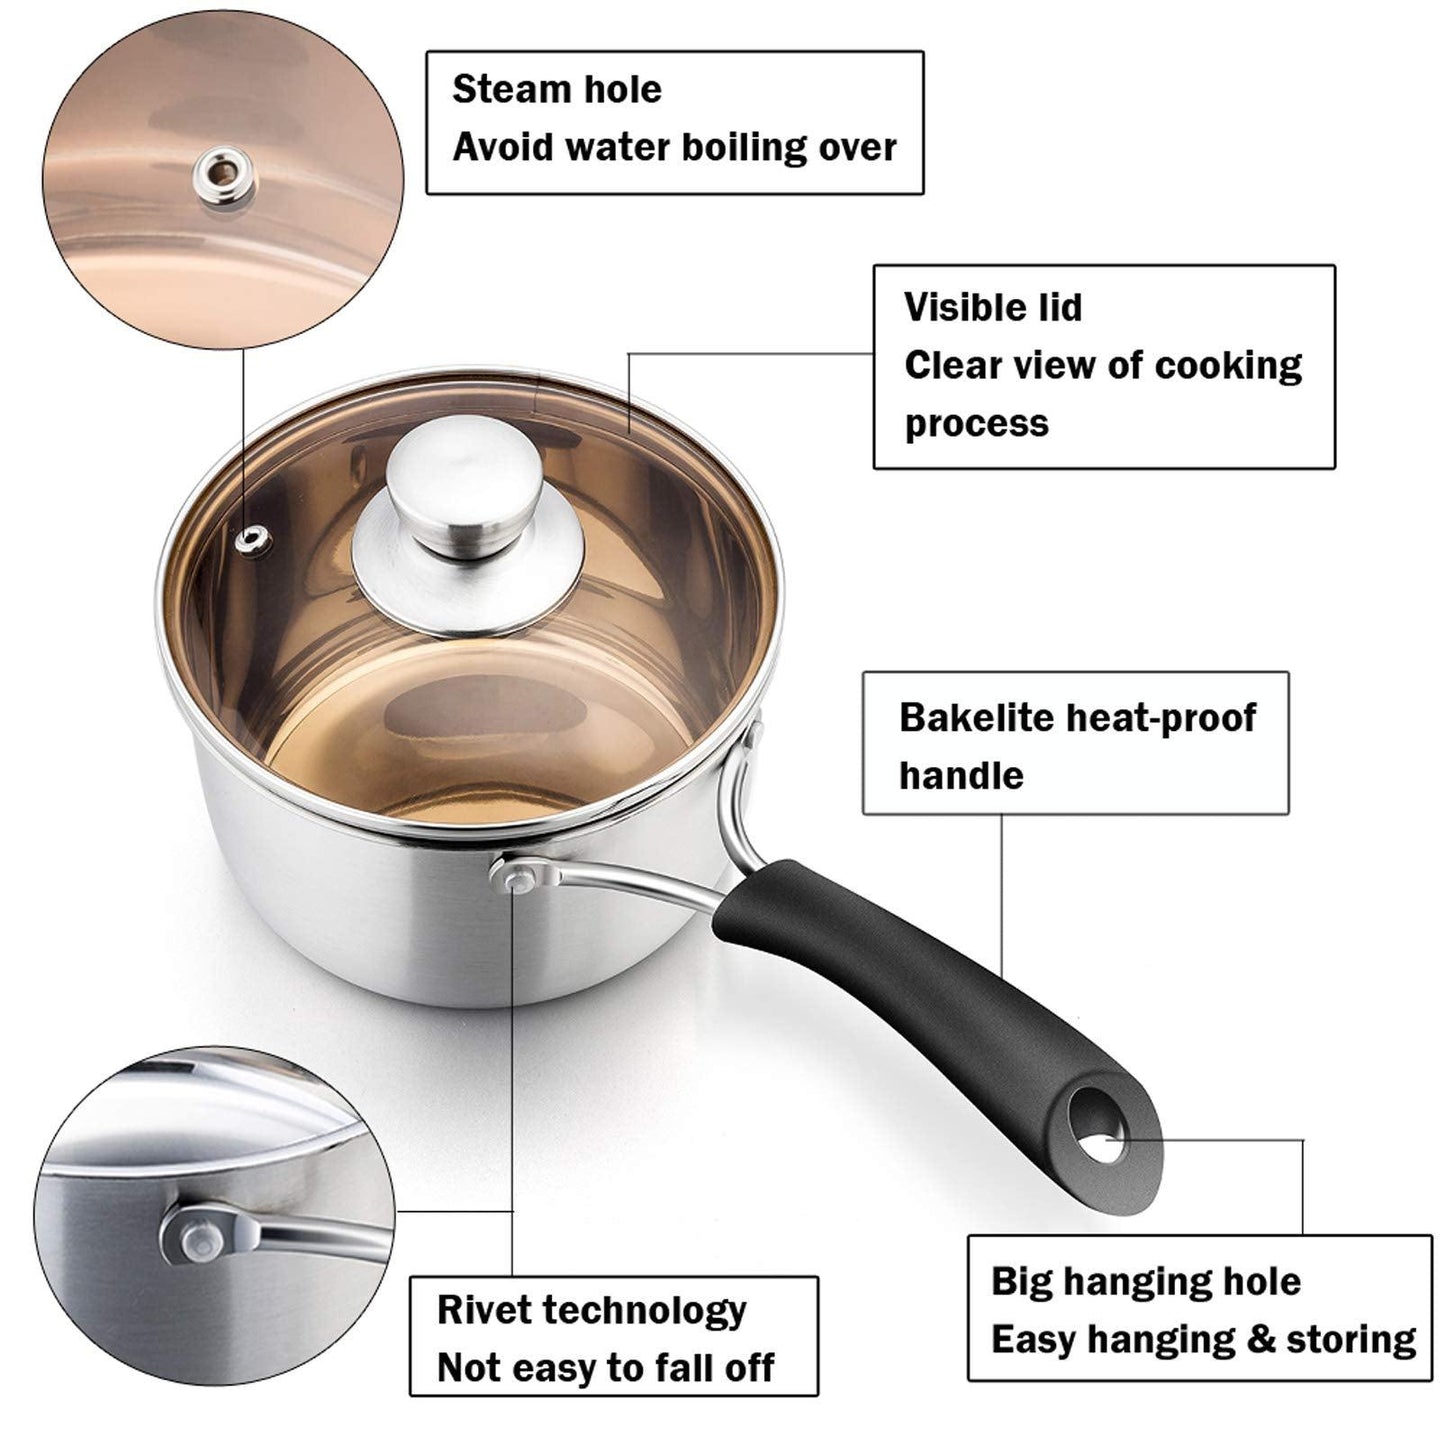 P&P CHEF 1 Quart Saucepan, Brushed Stainless Steel Saucepan with Lid, Small Sauce Pan for Home kitchen Restaurant Cooking, Easy Clean and Dishwasher Safe, Sliver, Brown, Black - CookCave